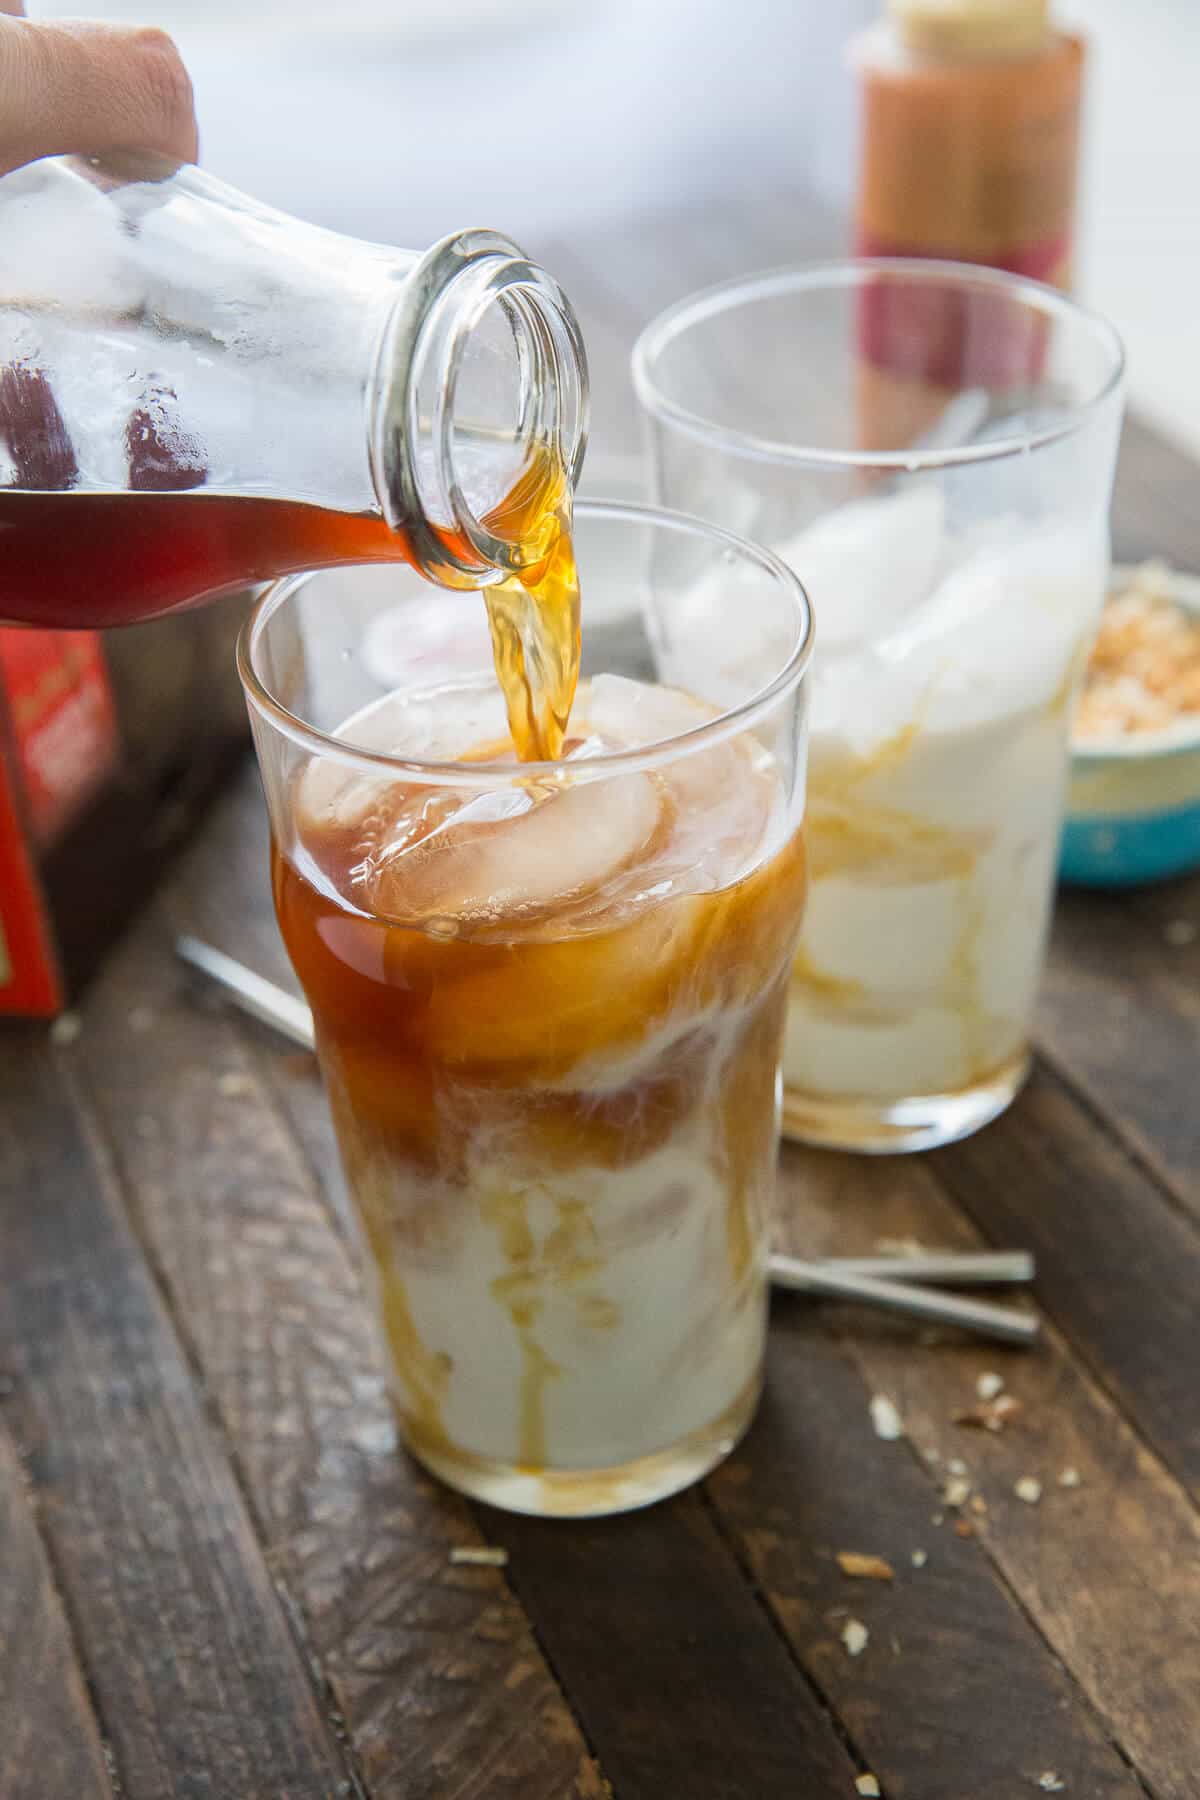 My favorite cold coffee beverage is an iced macchiato! This caramel coconut is the best!